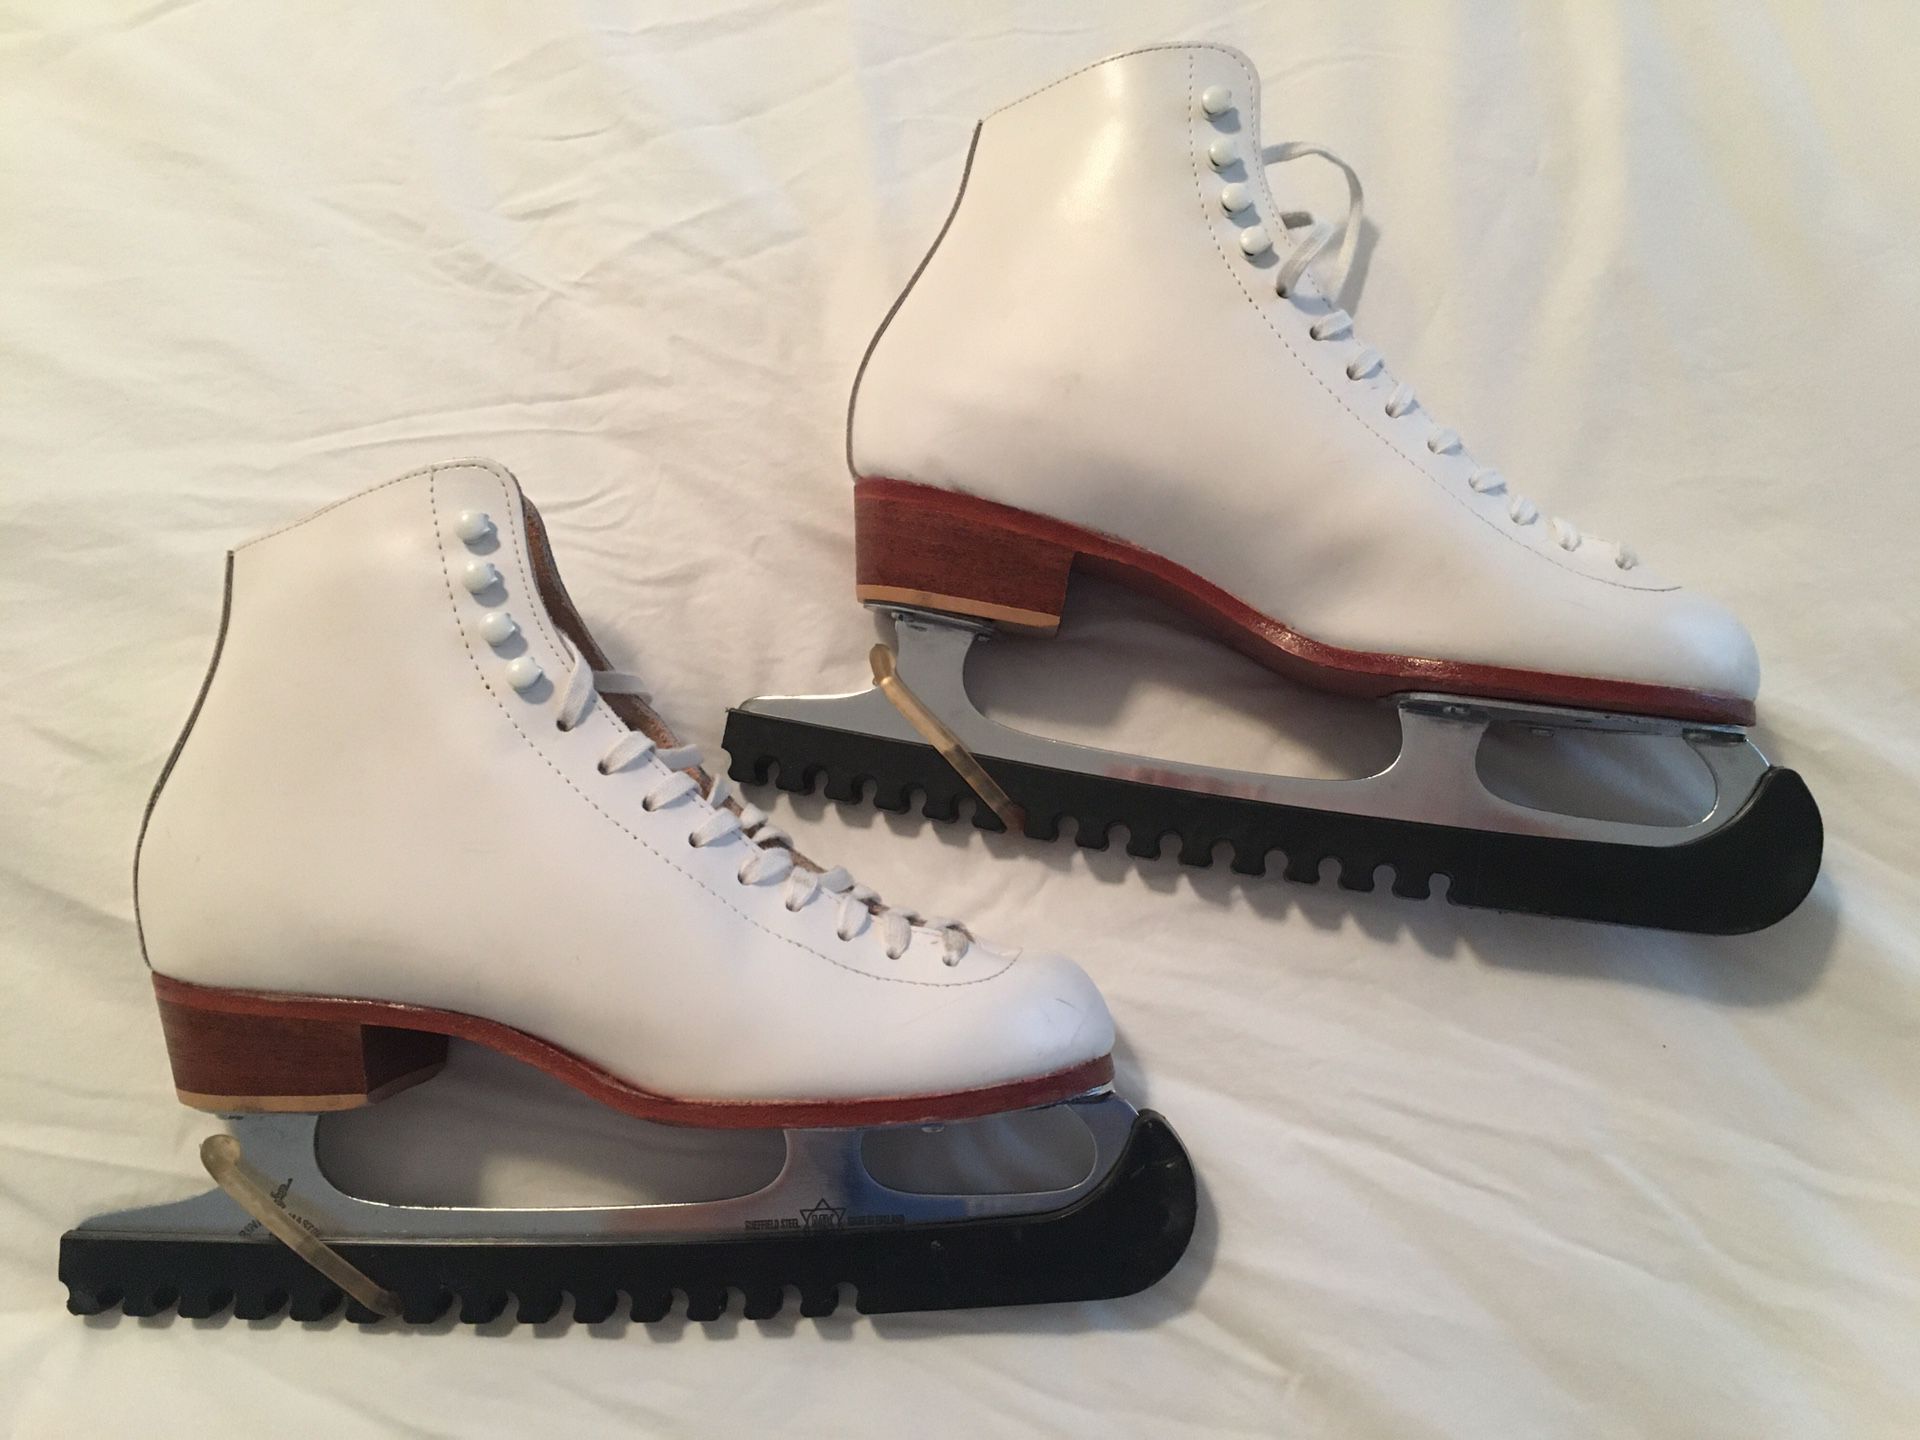 Women’s Leather Riedell ice skates - size 7, Perfect Condition!! $45